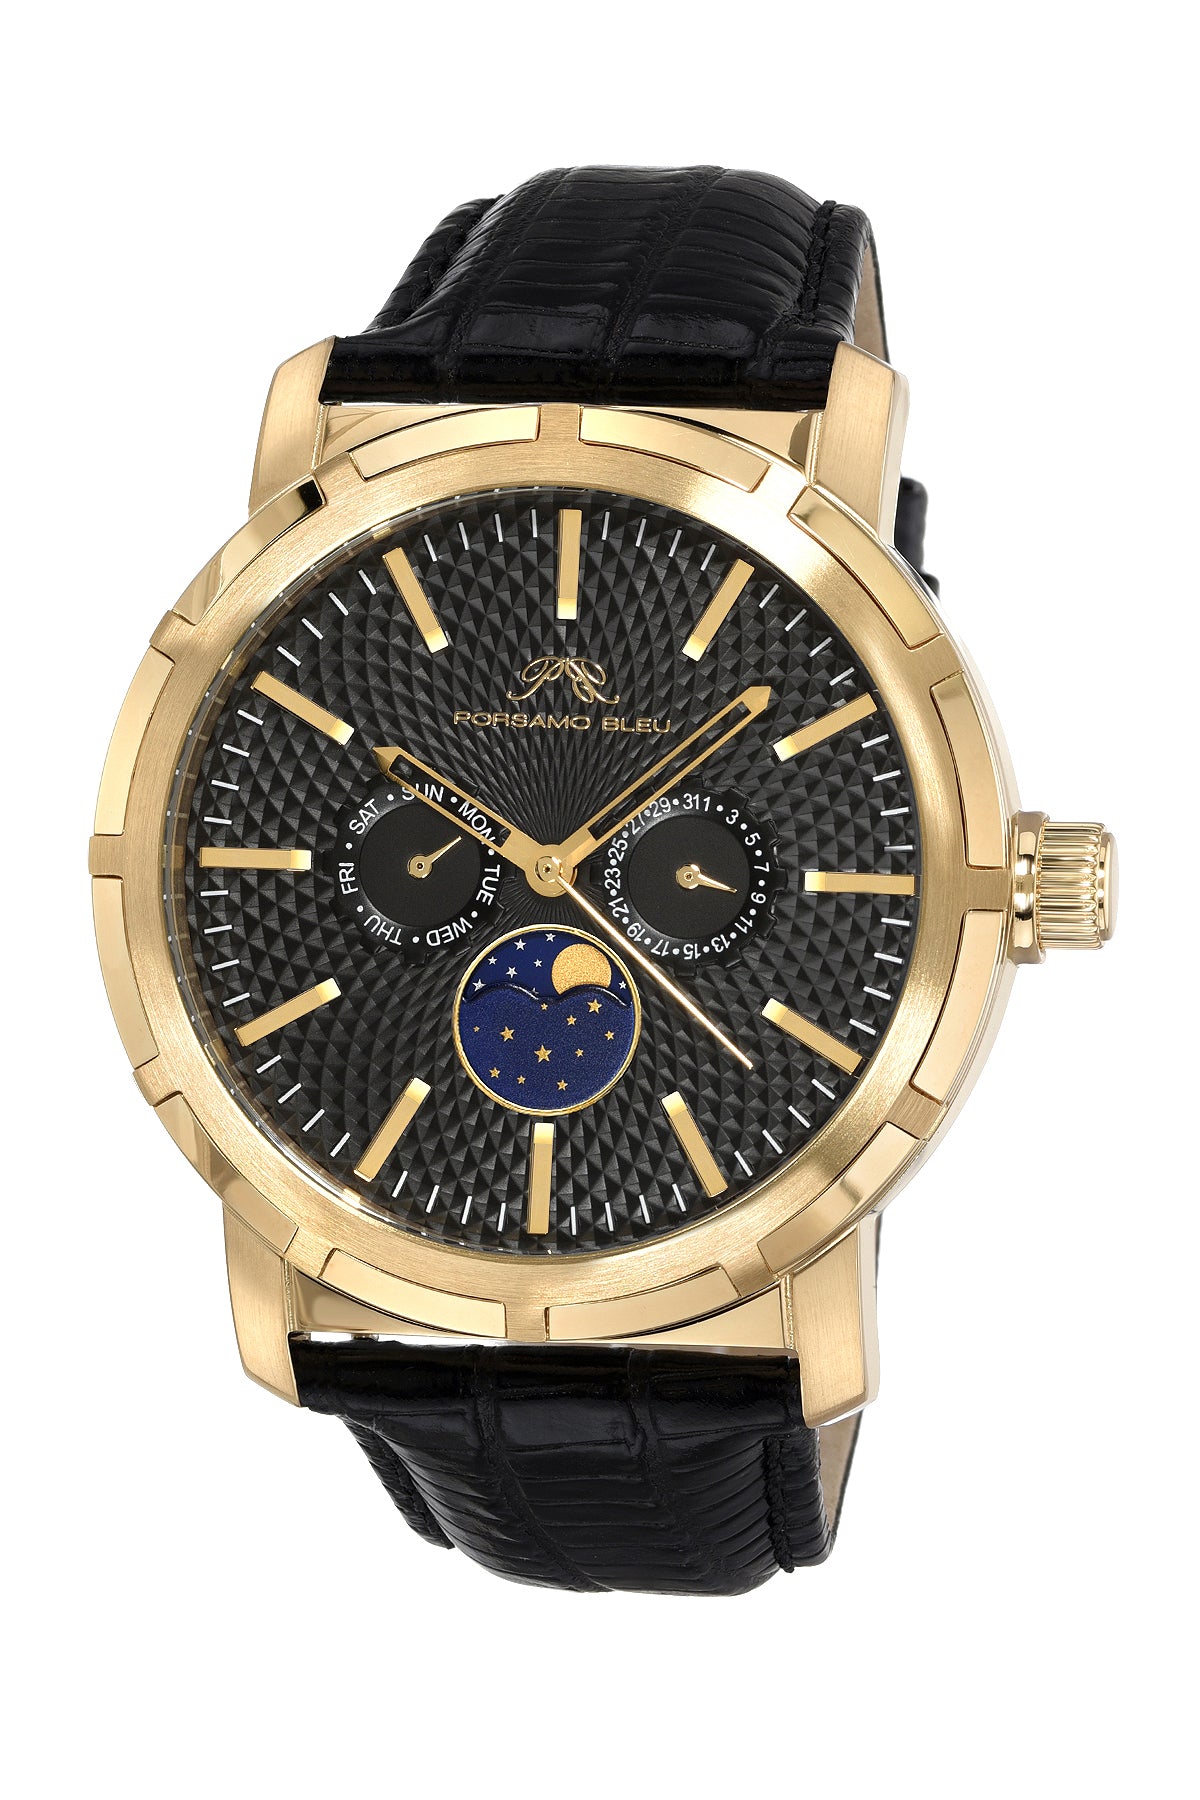 Porsamo Bleu Nycm21 Luxury Moon Phase Mens Genuine Leather Band Watch, Gold, Black With Blue Guilloche Dial 1201DNYL